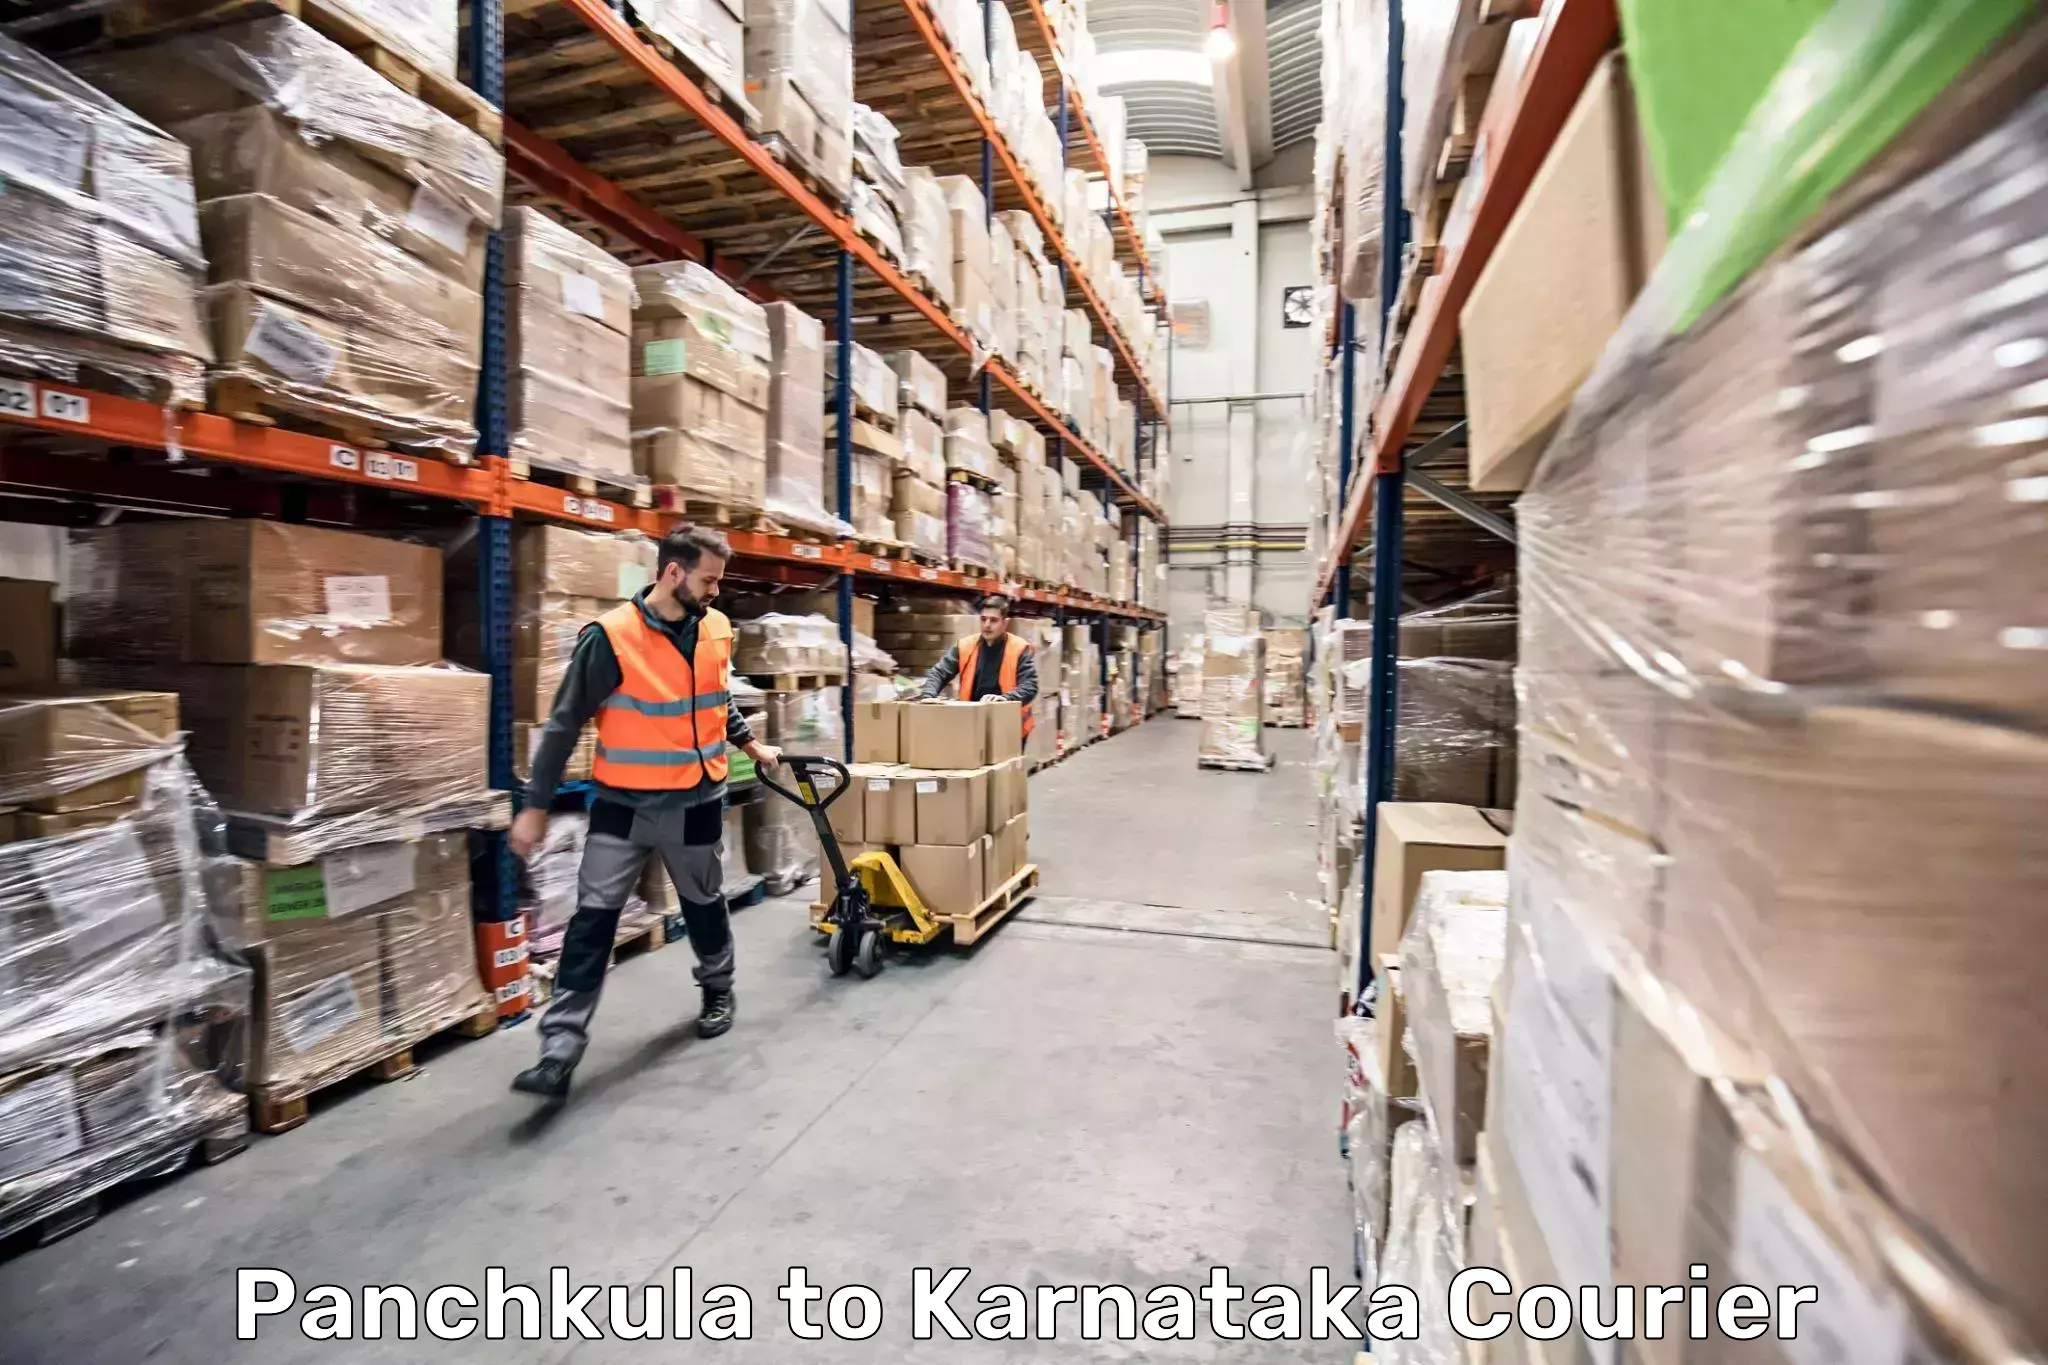 Luggage shipping specialists Panchkula to Dharwad